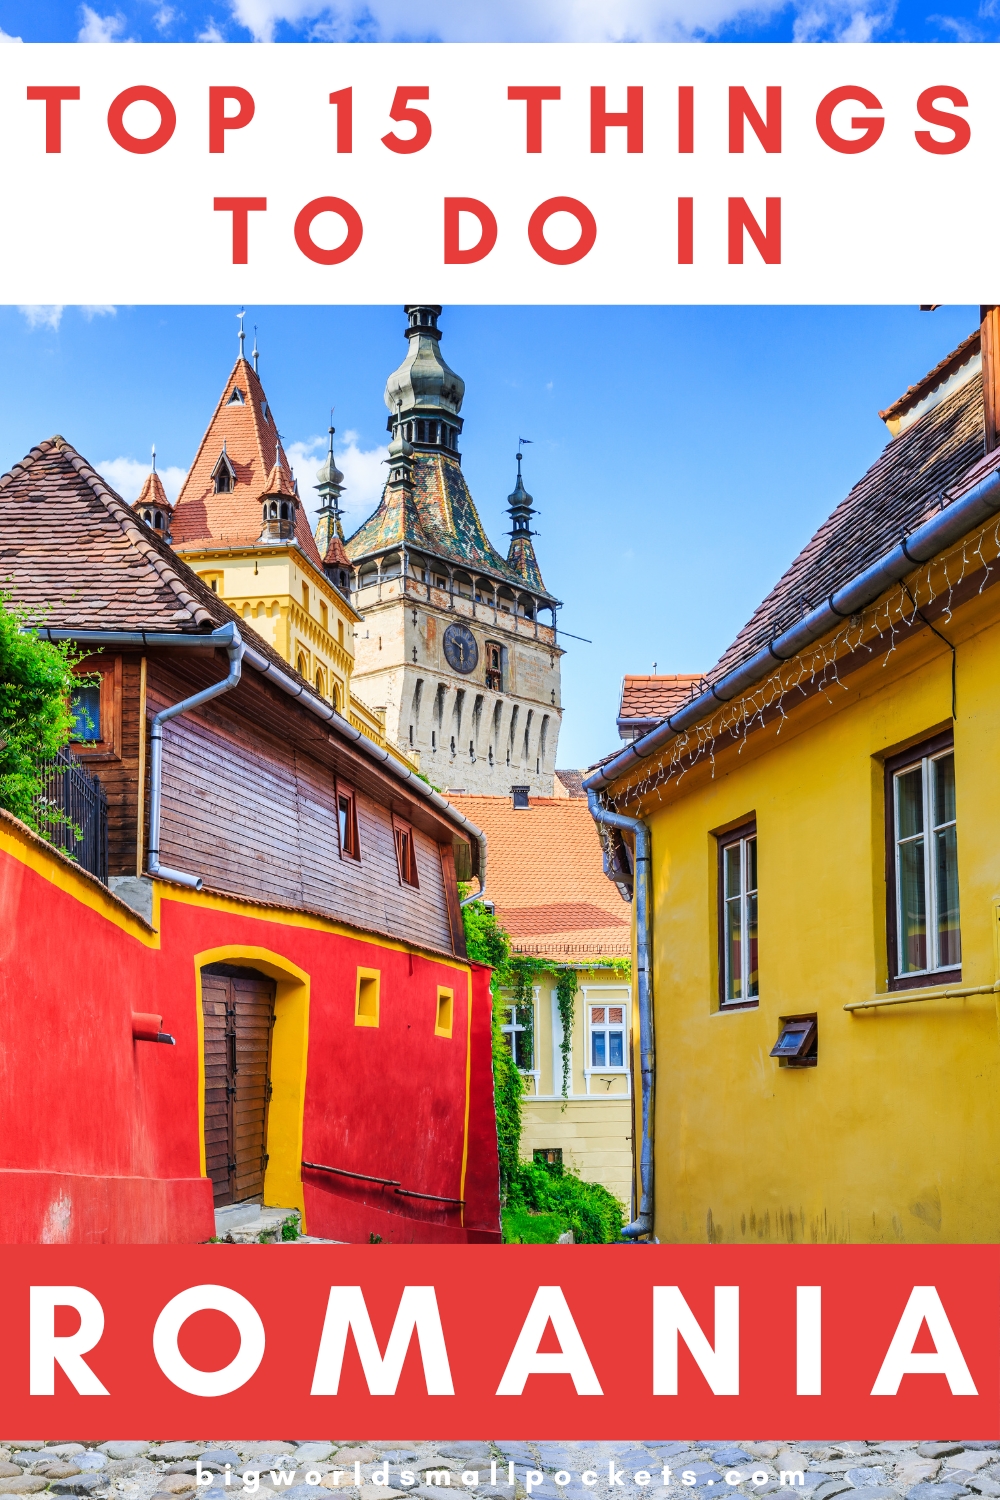 Top 15 Things to Do in Romania